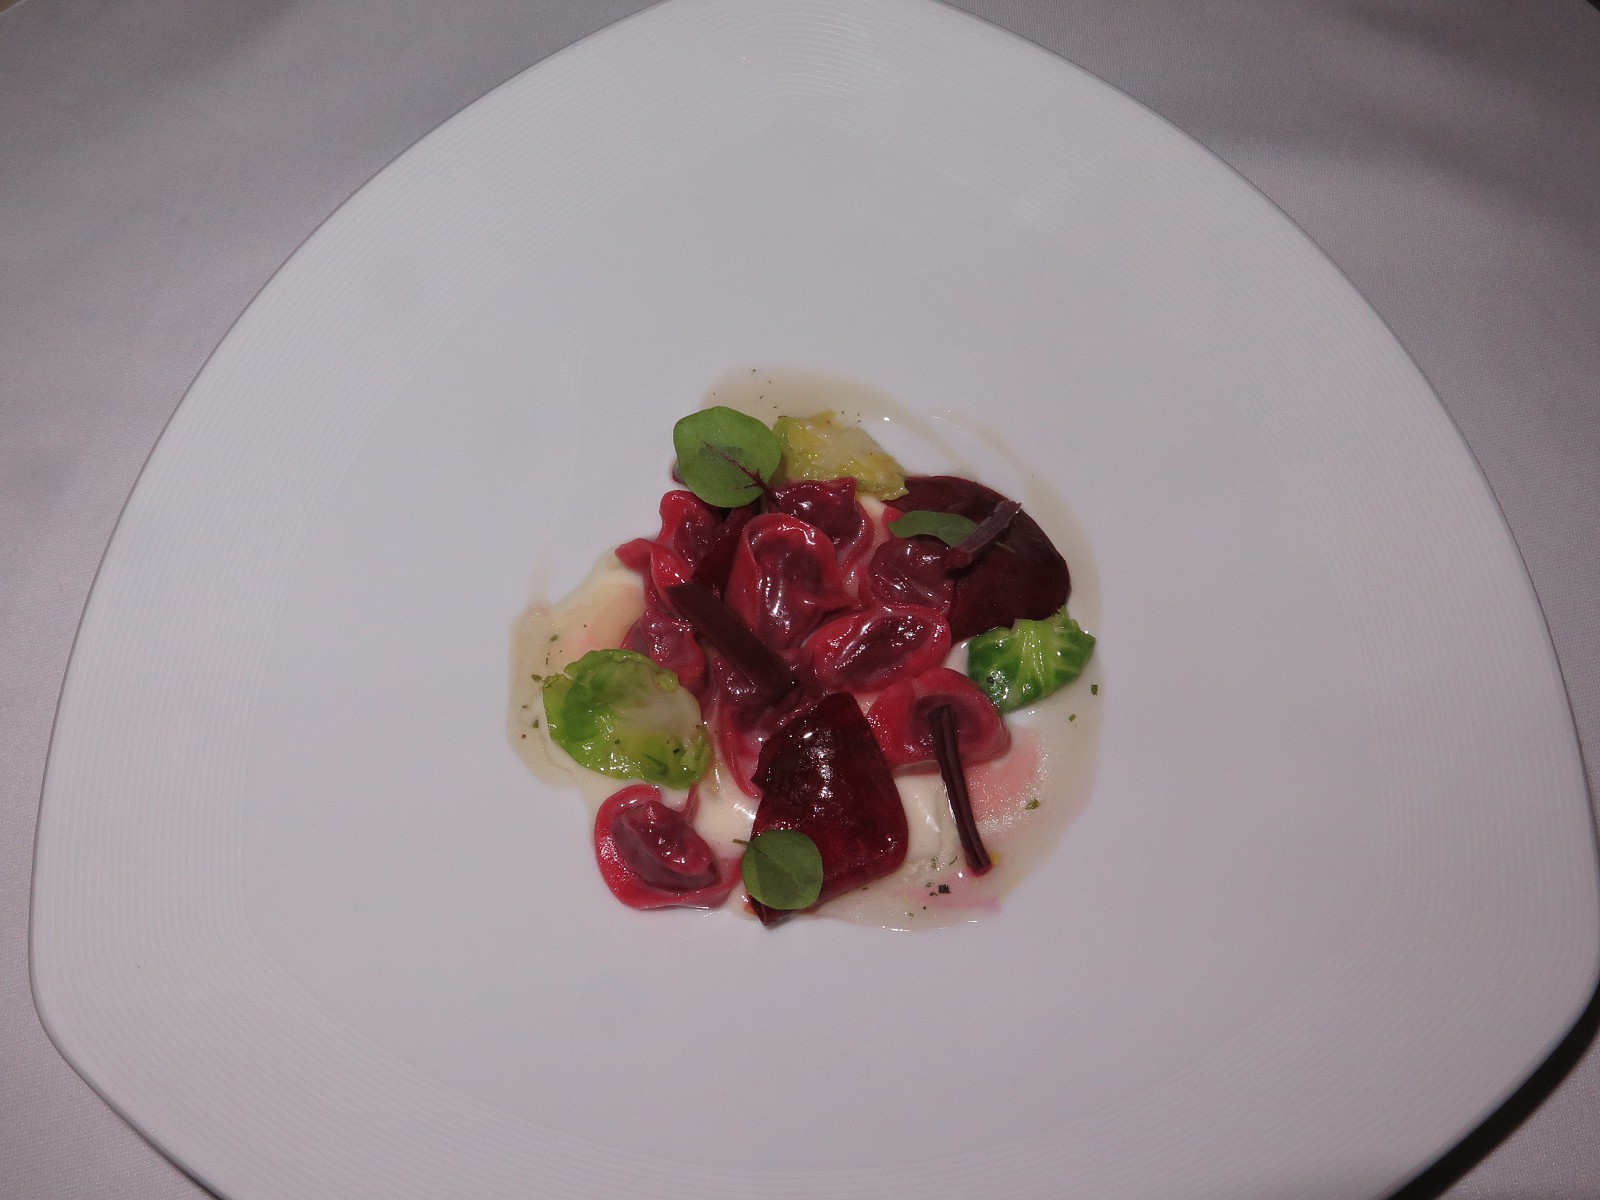 “Beetroot and red cabbage tortellini with parmesan cream and katsuobushi infusion”